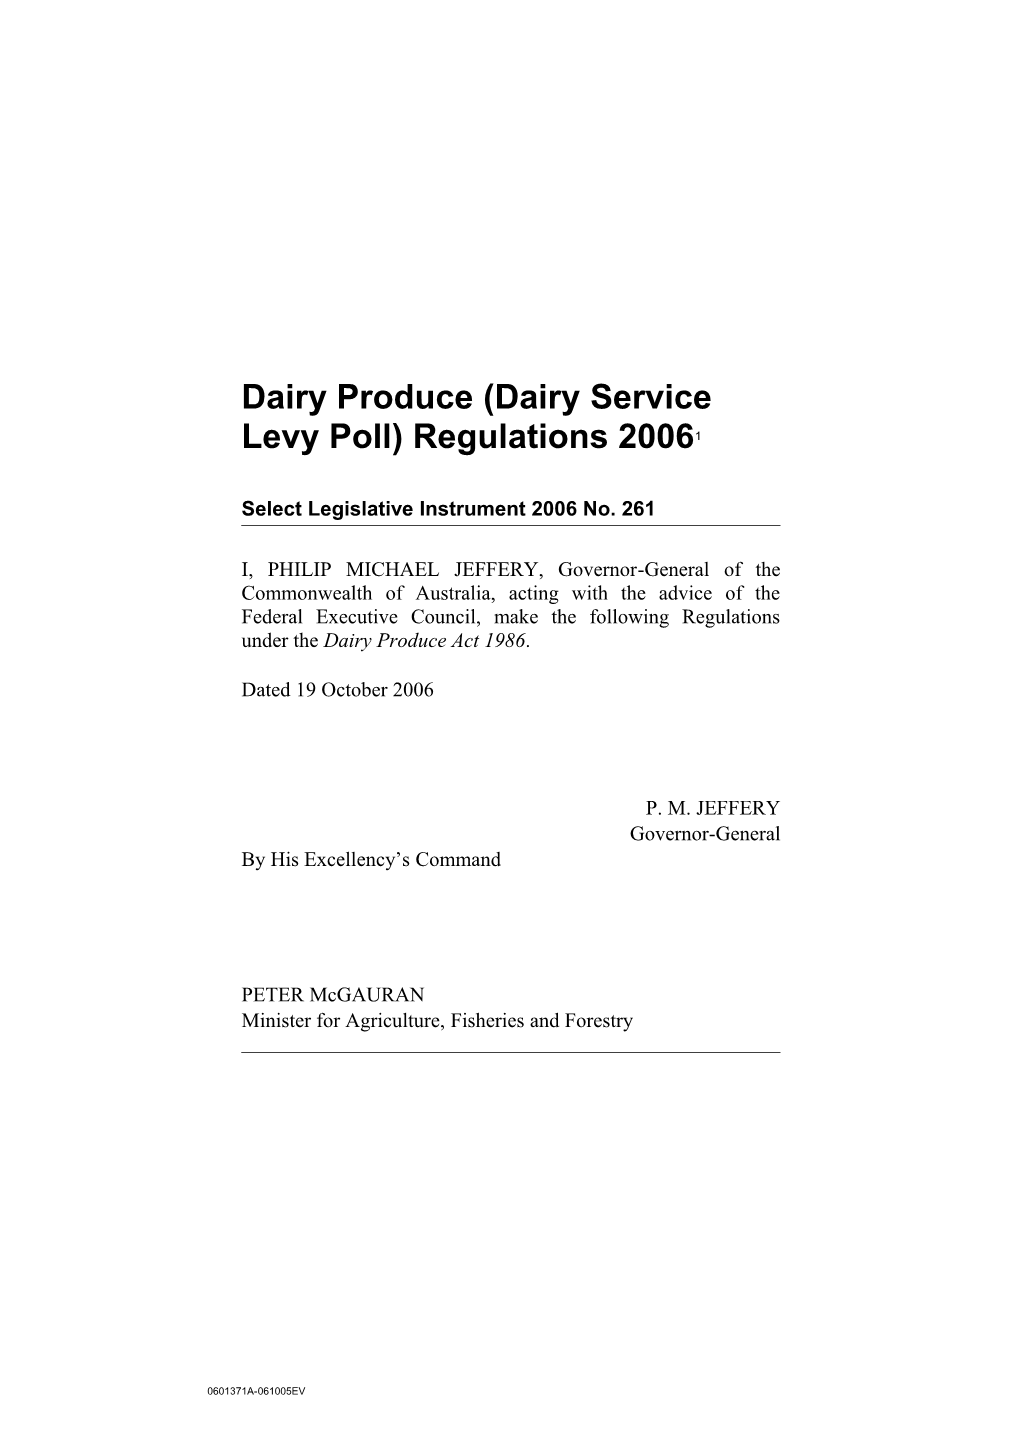 Dairy Produce (Dairy Levy Poll) Regulations 2006